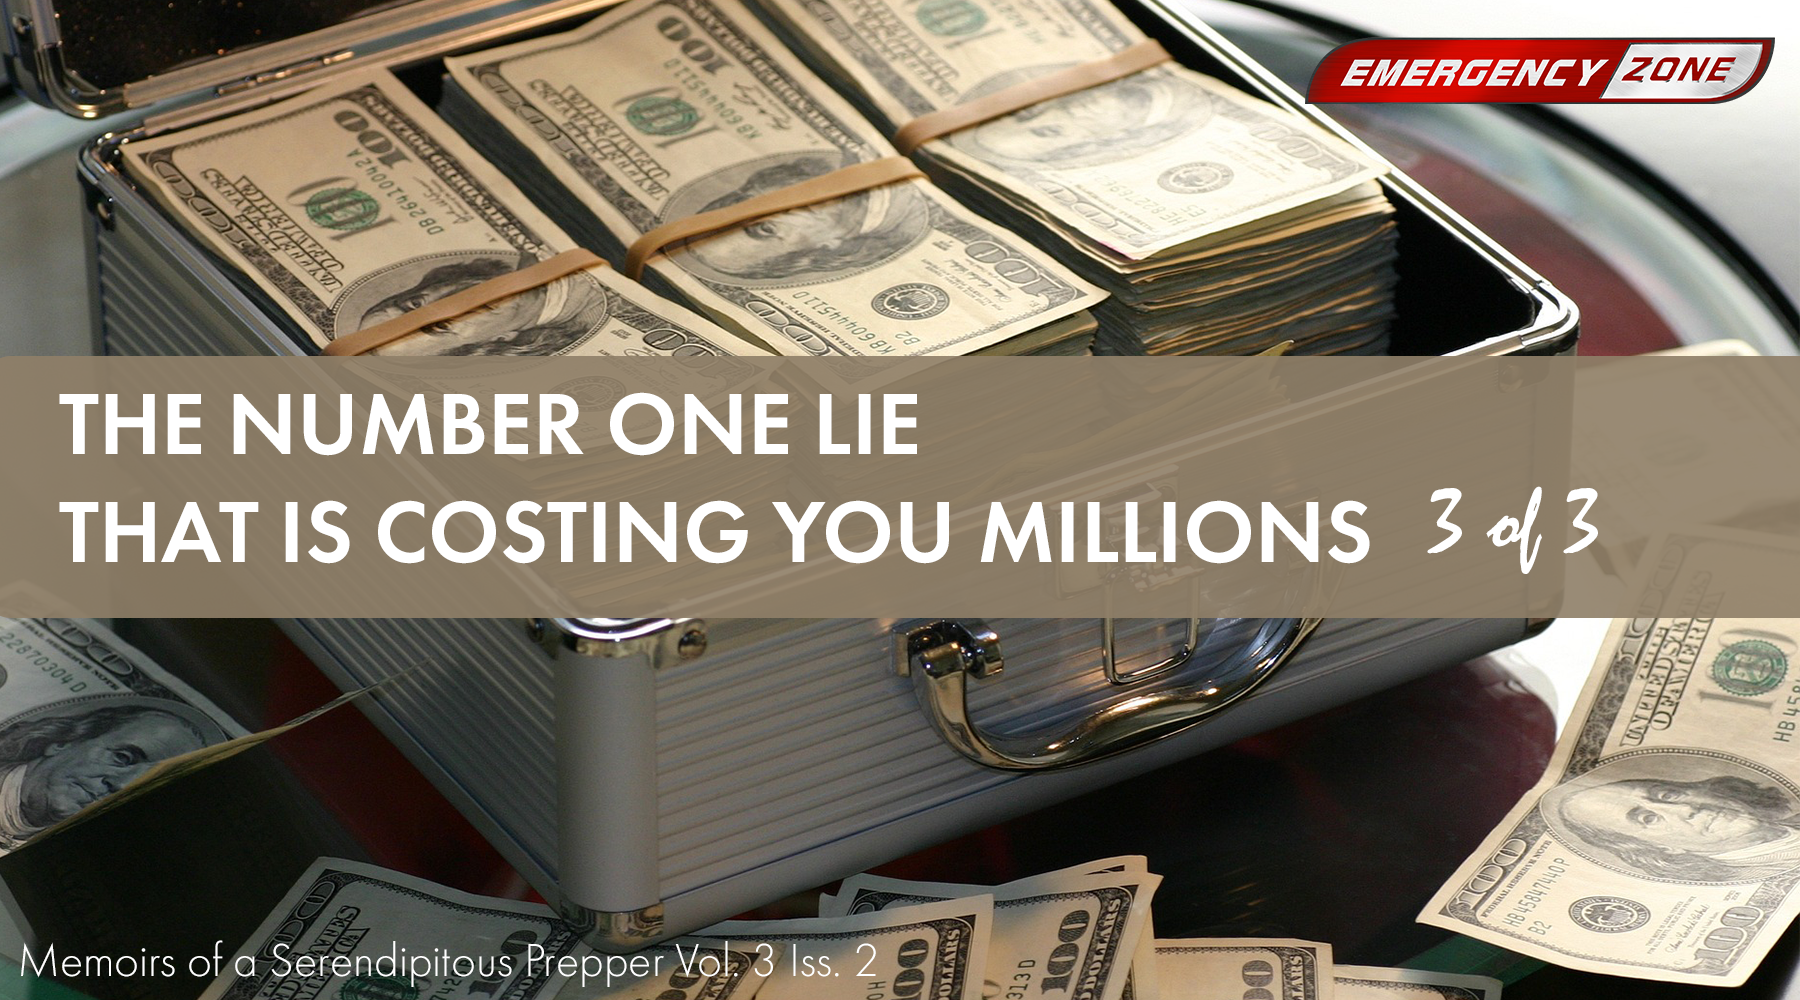 The Number One Lie That is Costing You Millions